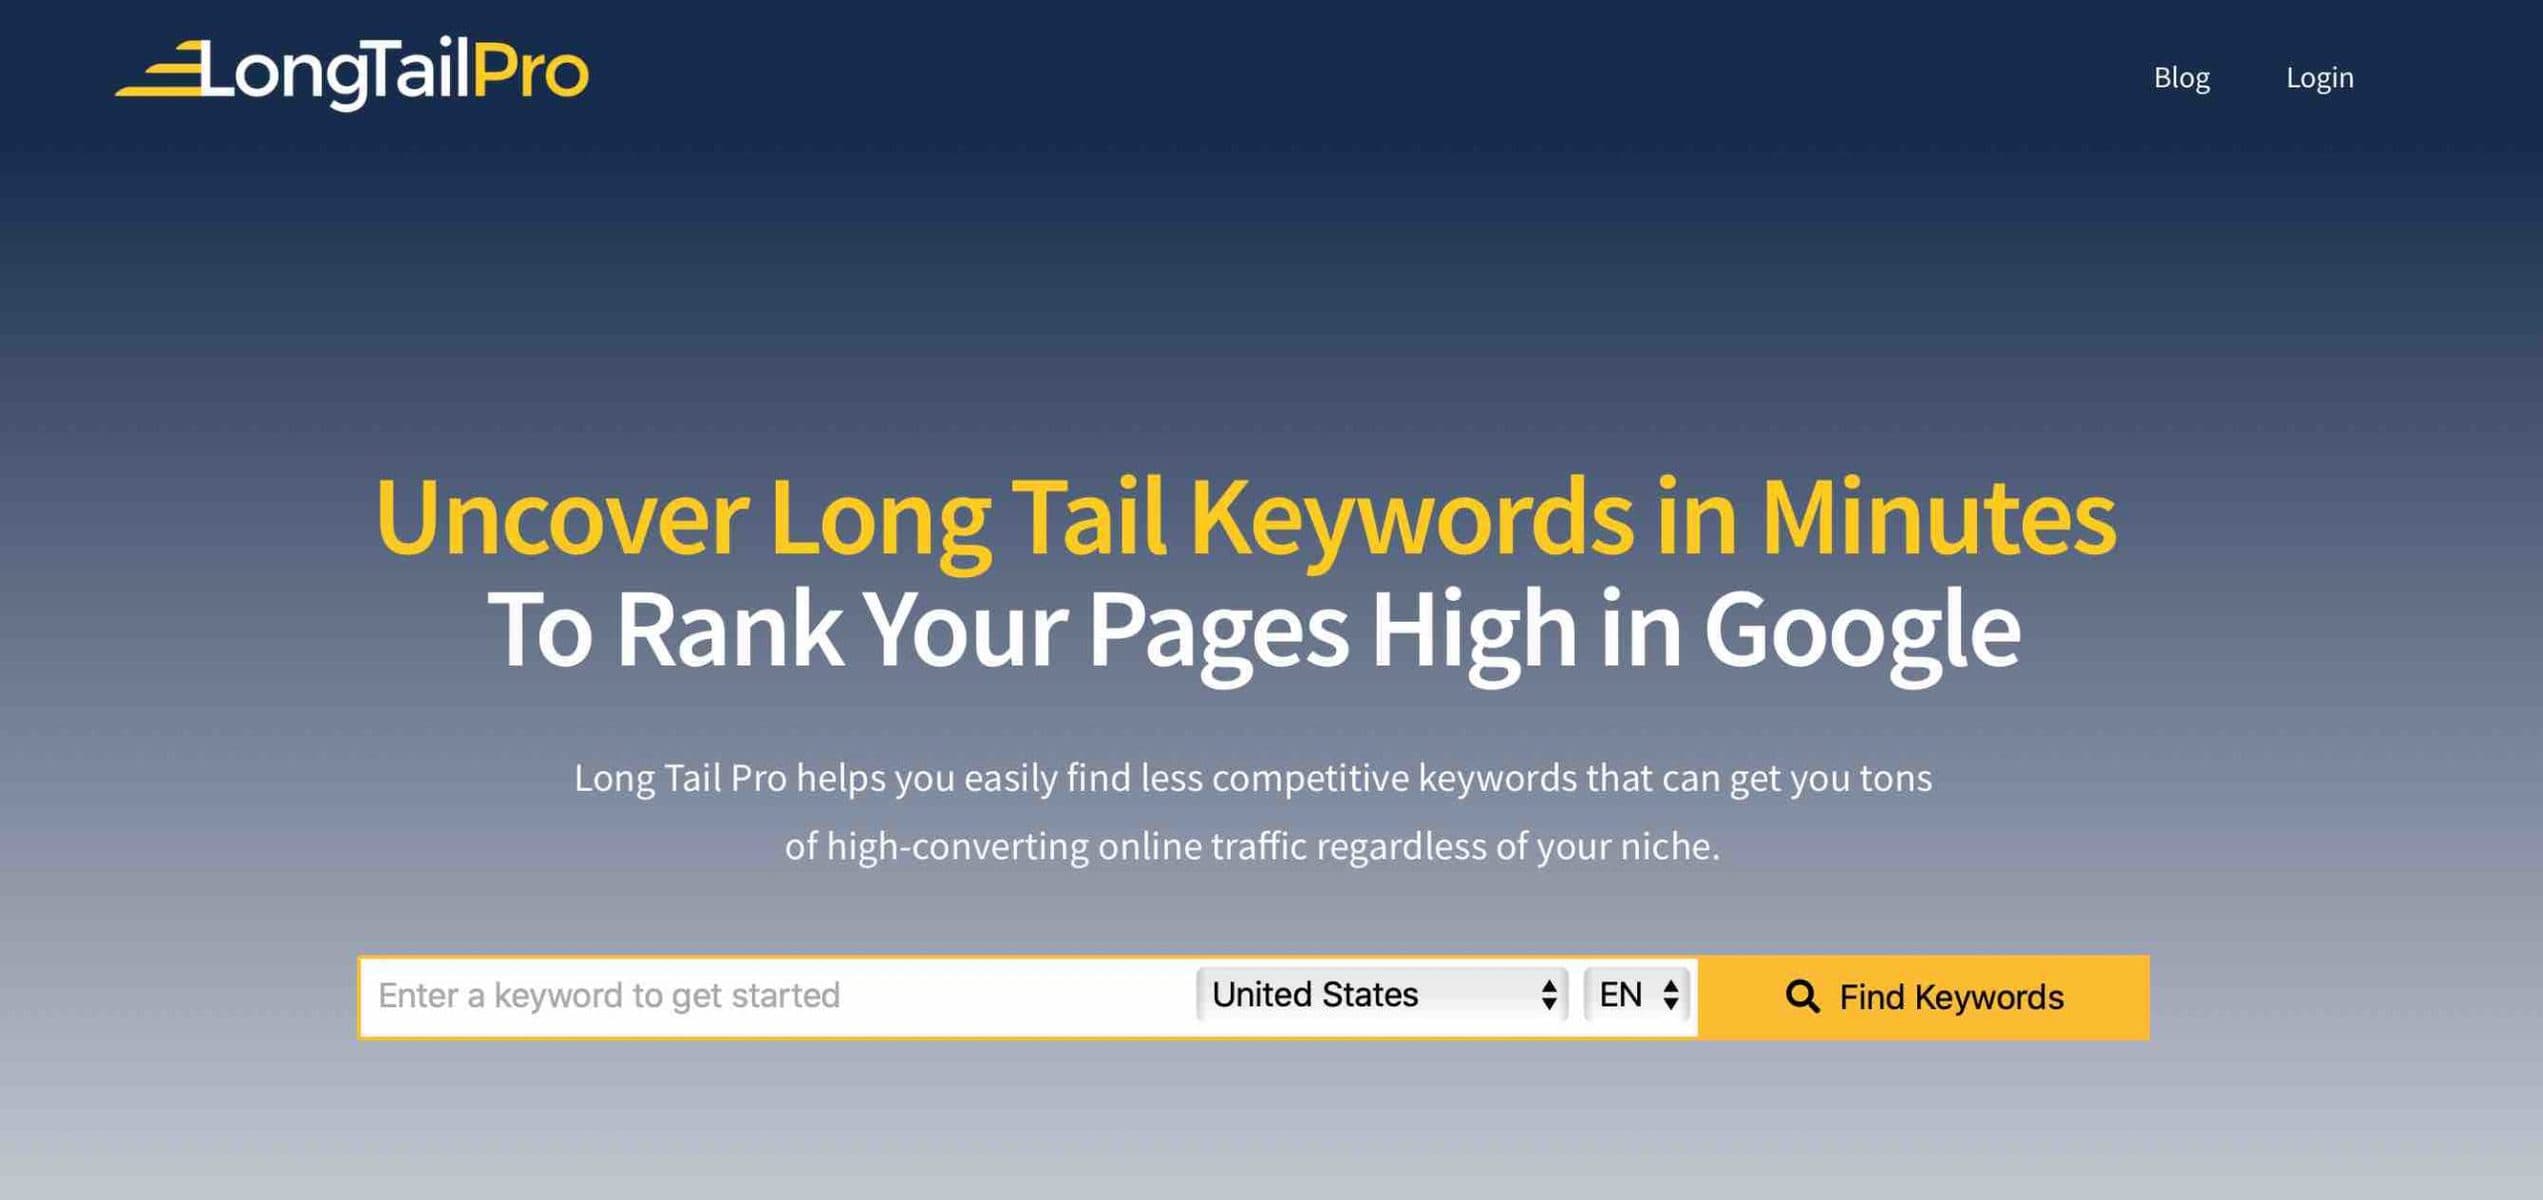 Uncover Long Tail Keywords in Minutes 